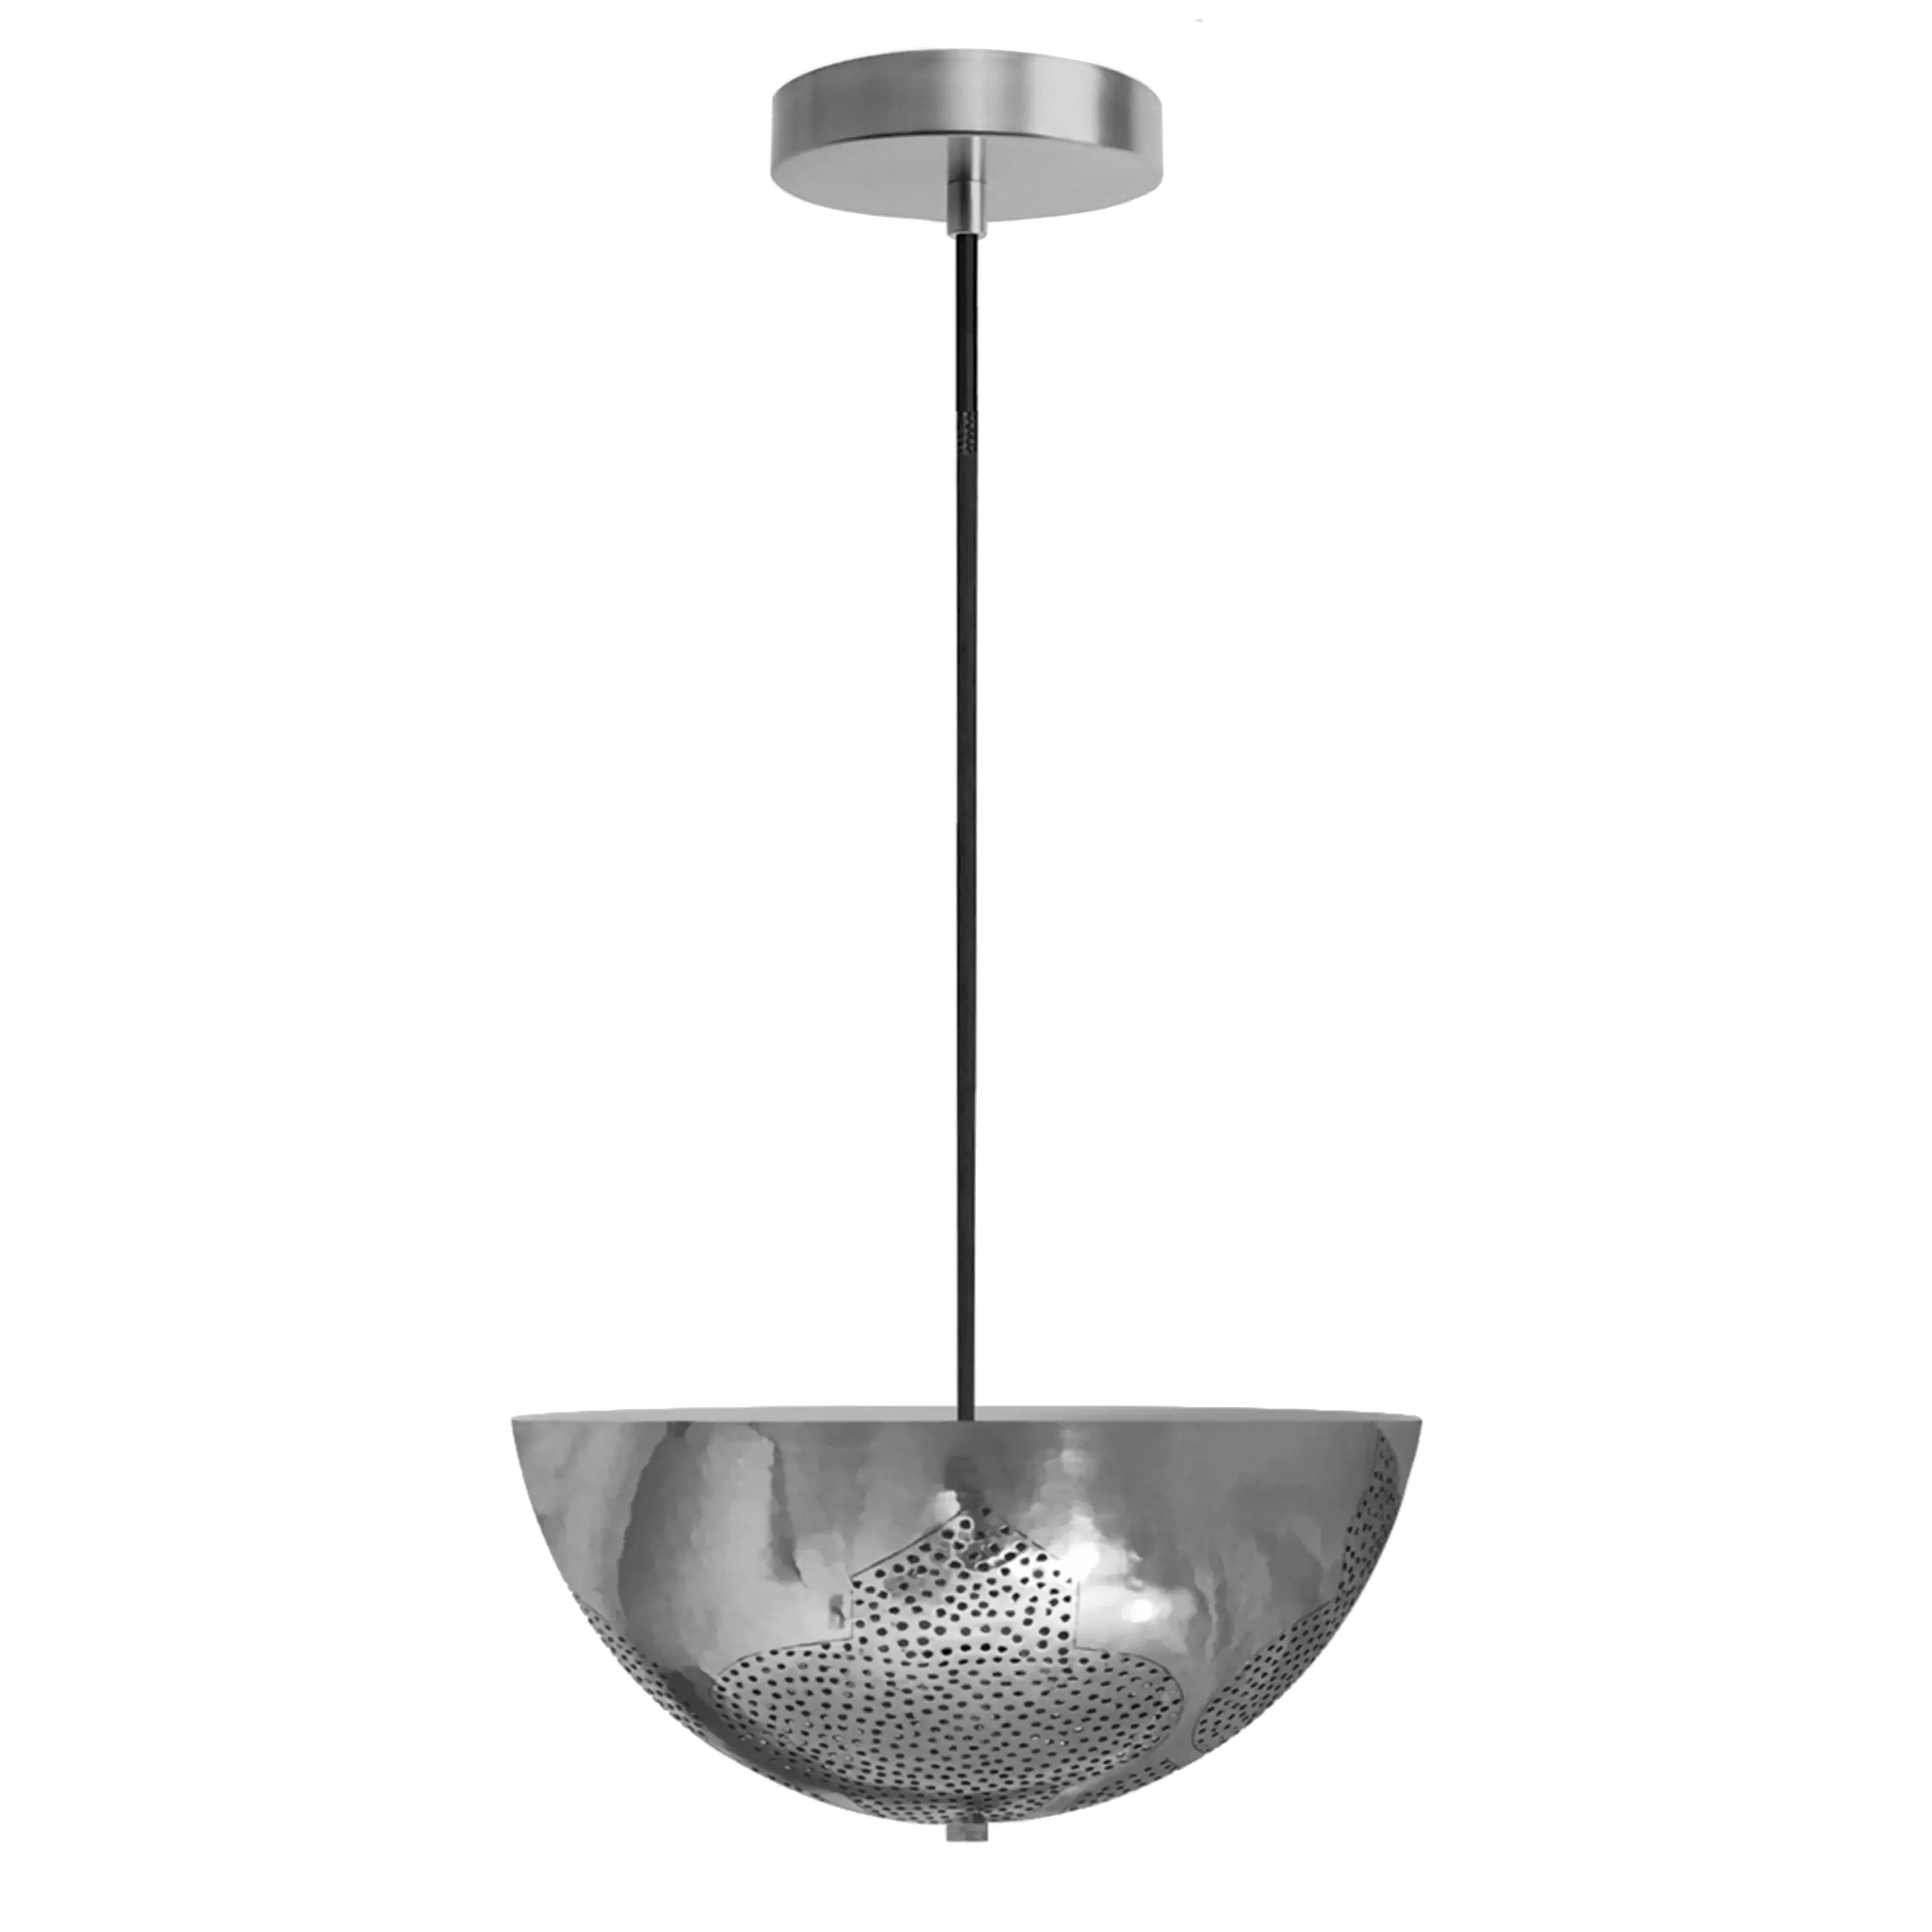 Dounia home Pendant light in  nickel silver  made of Metal, Model: Najma dome